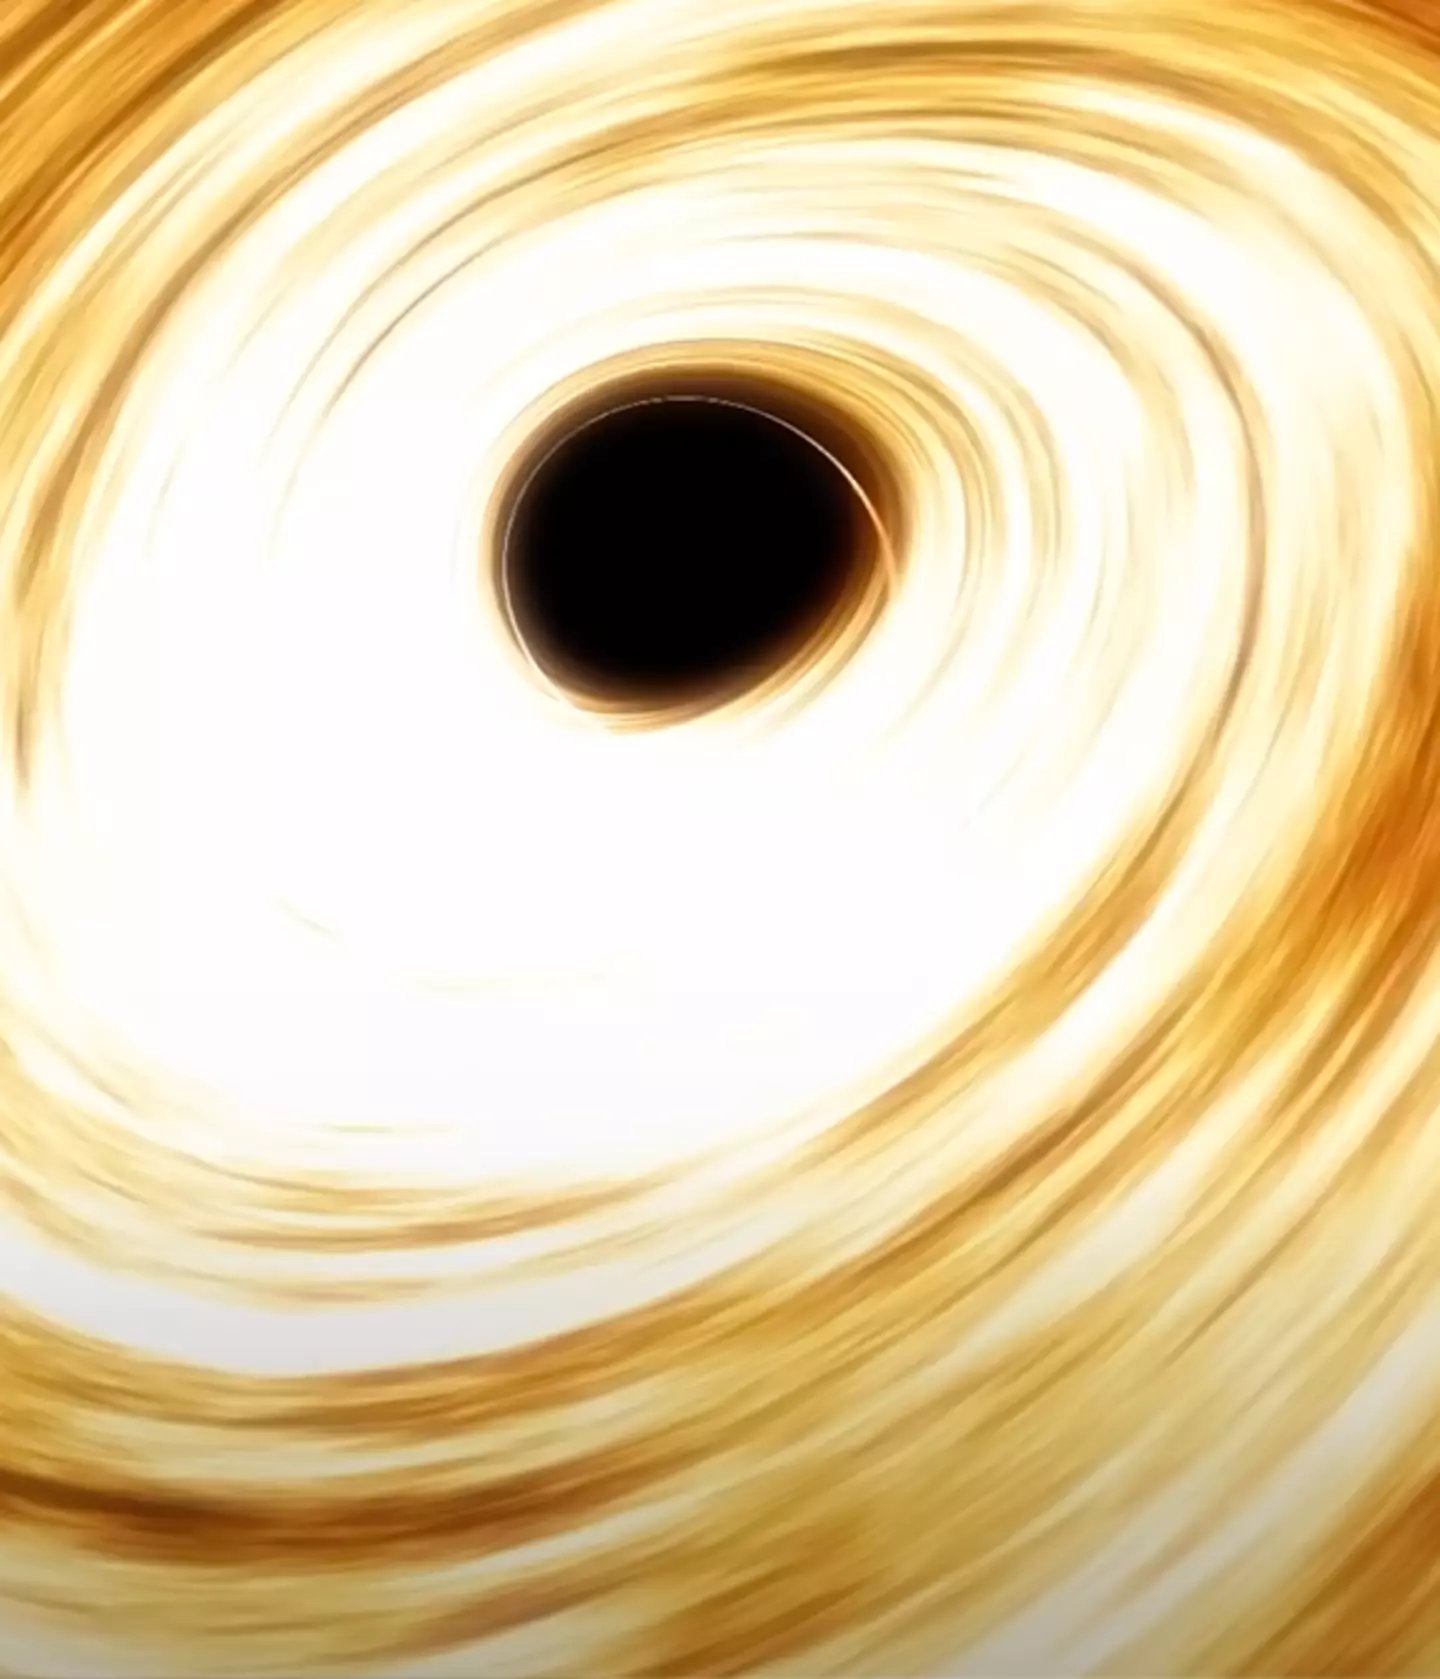 The video reassured we have 'nothing to fear' when it comes to black holes merging / Caltech / Space Engine